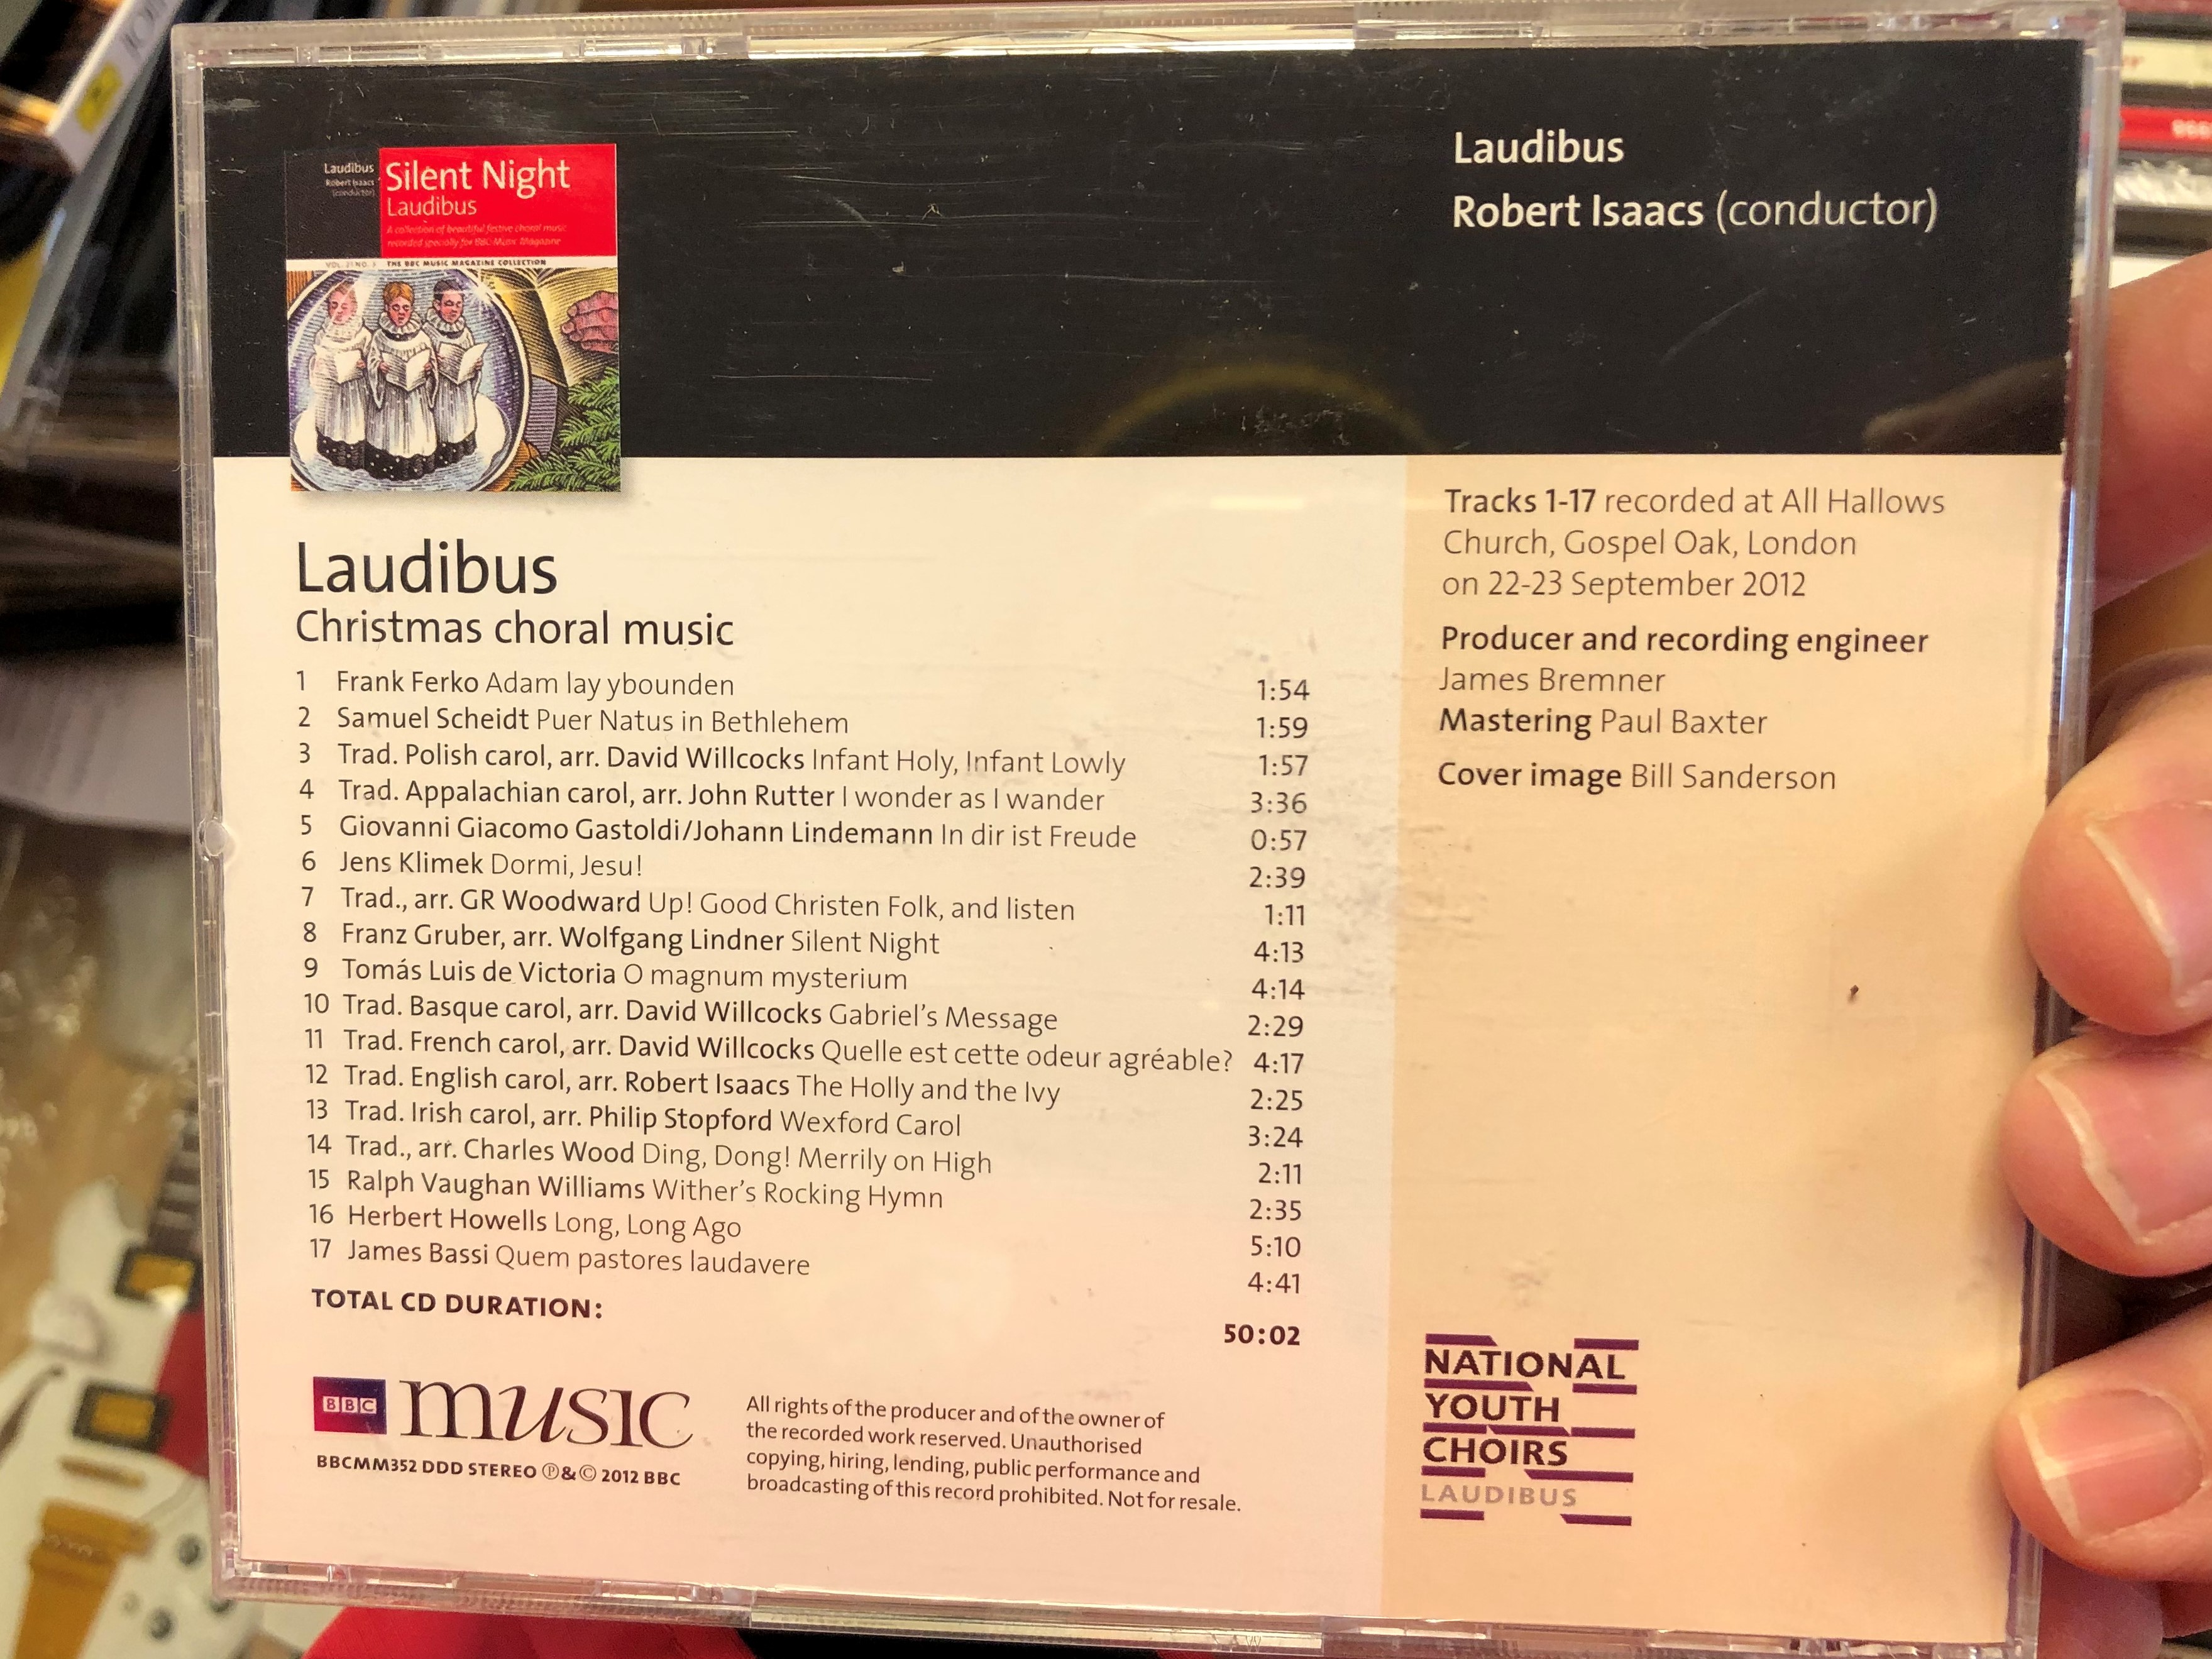 laudibus-silent-night-robert-isaacs-conductor-a-collection-of-beautiful-festive-choral-music-recorded-specially-for-bbc-music-magazine-vol.-21-no.-3-bbc-music-magazine-audio-cd-2012.jpg